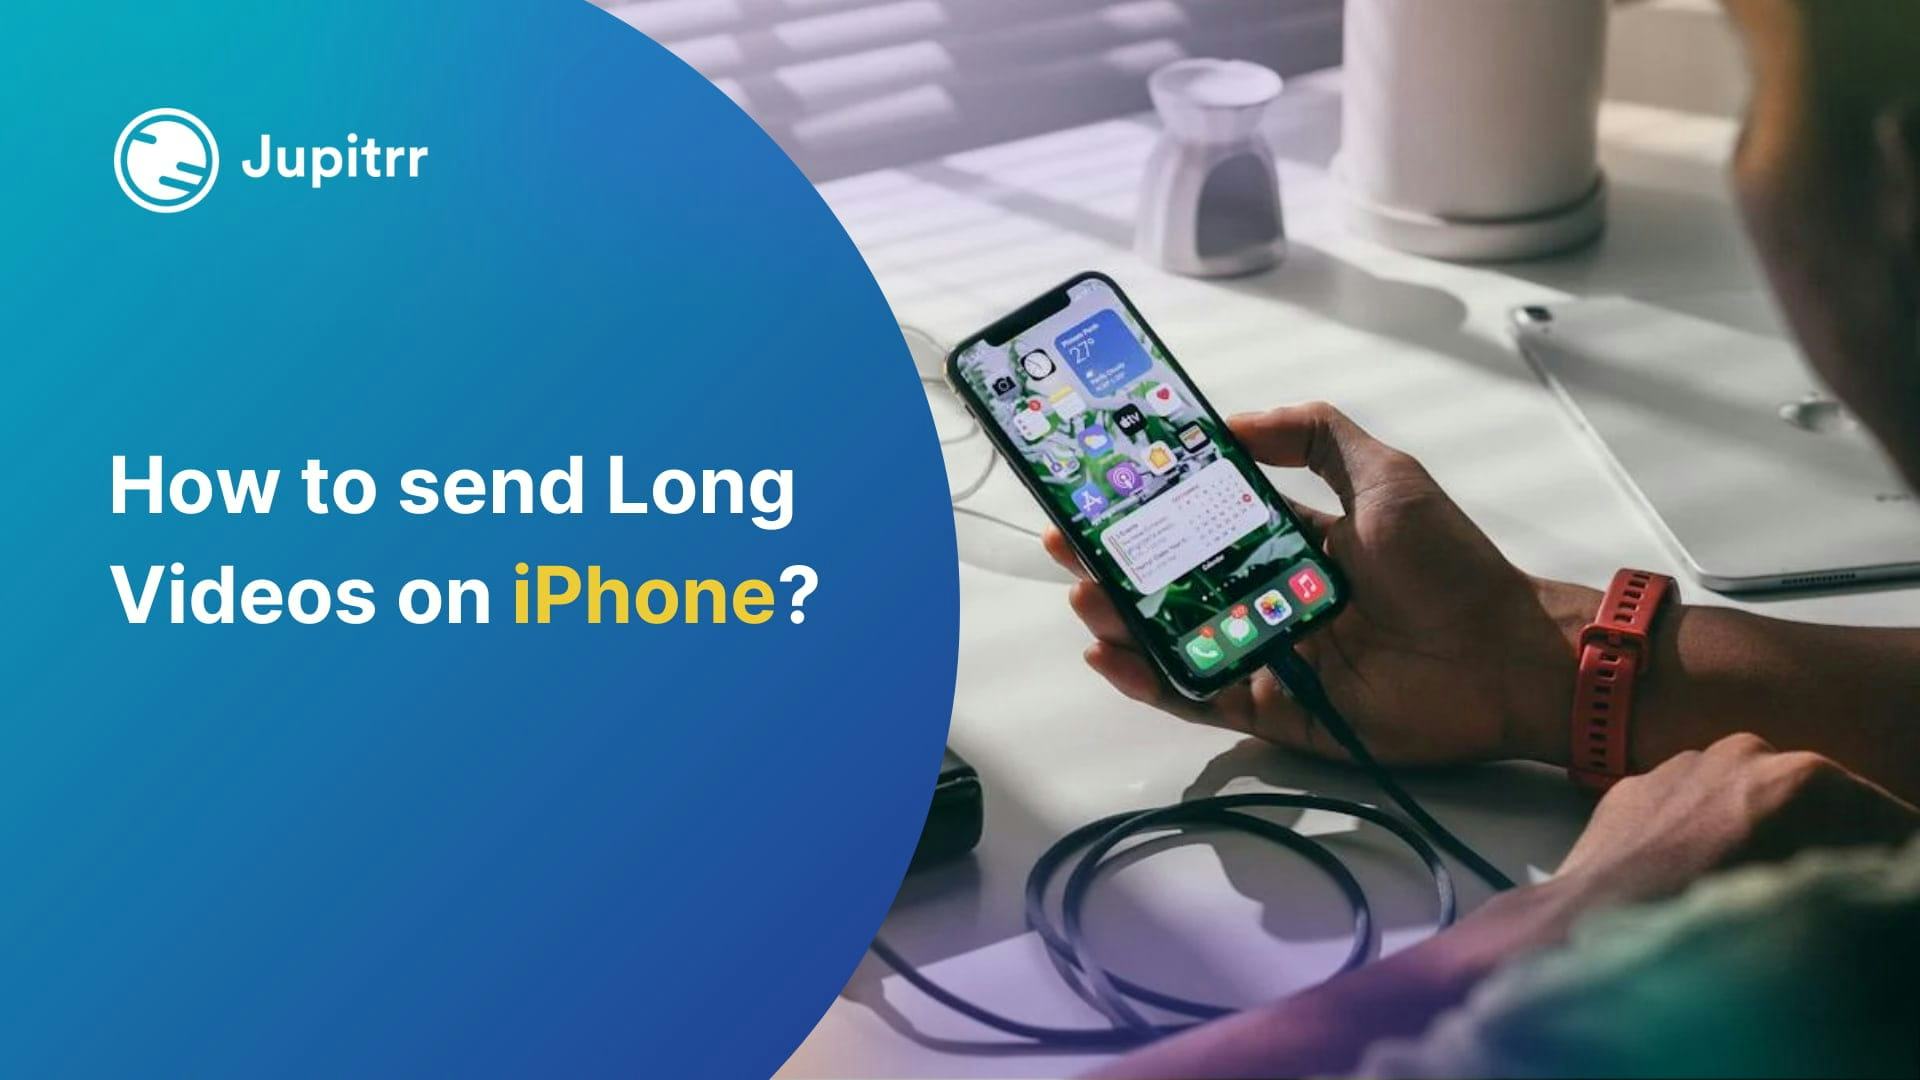 How to send Long Videos on iPhone?